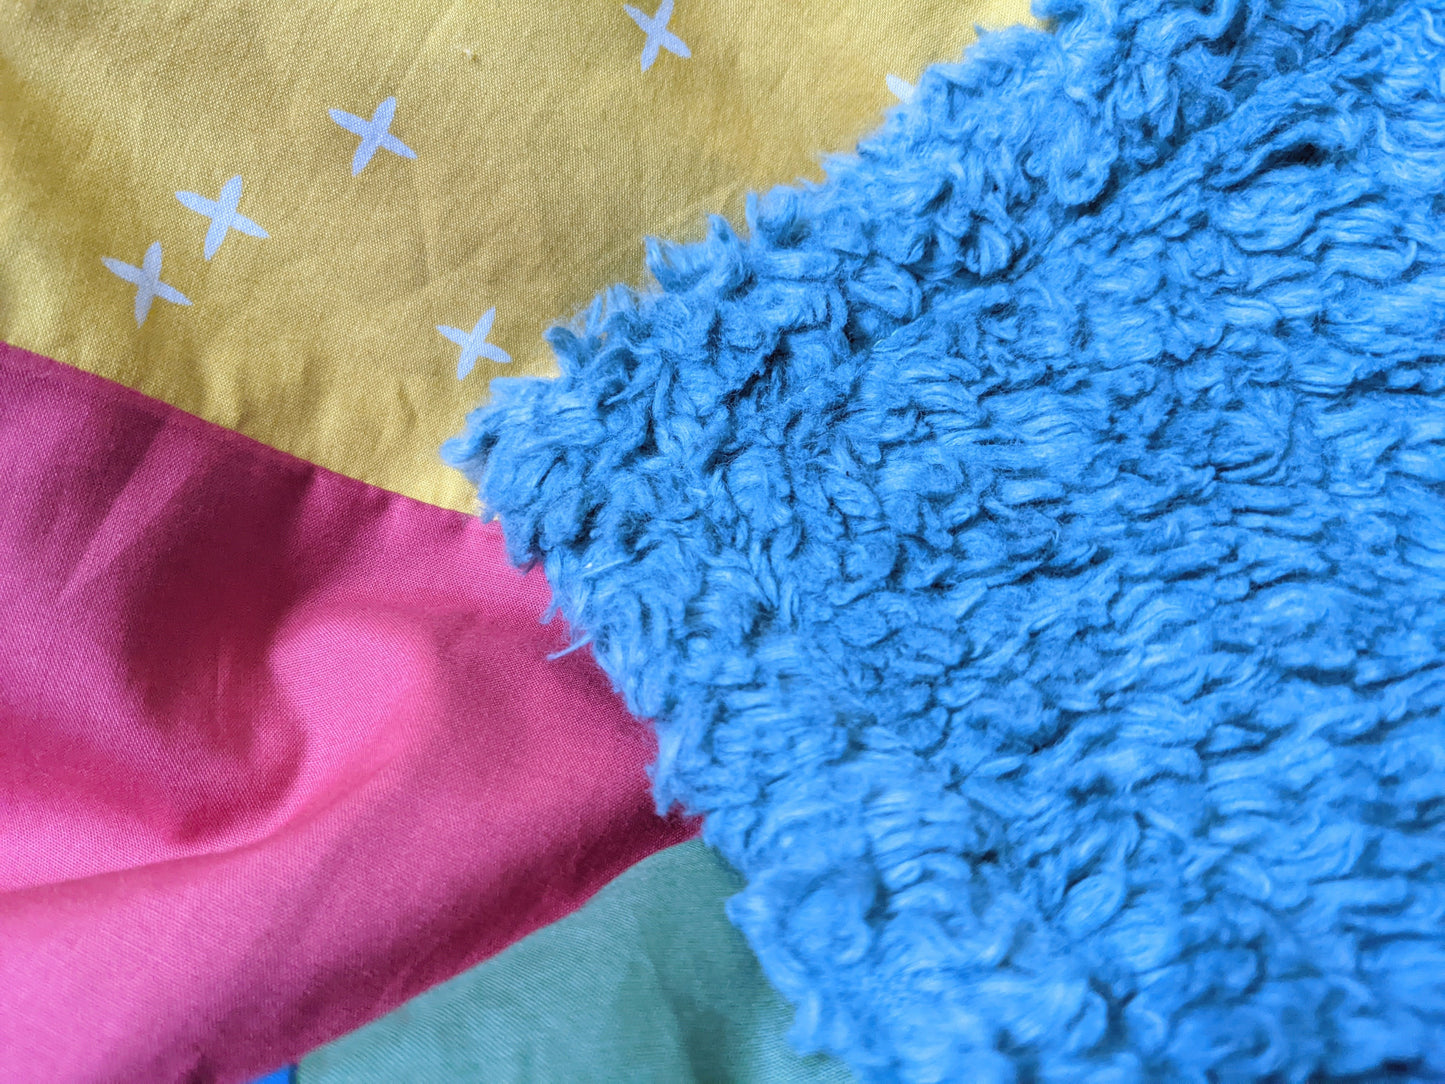 Baby Peipei backing for bright patchwork quilt. A blue shaggy sherpa made from 100% organic cotton